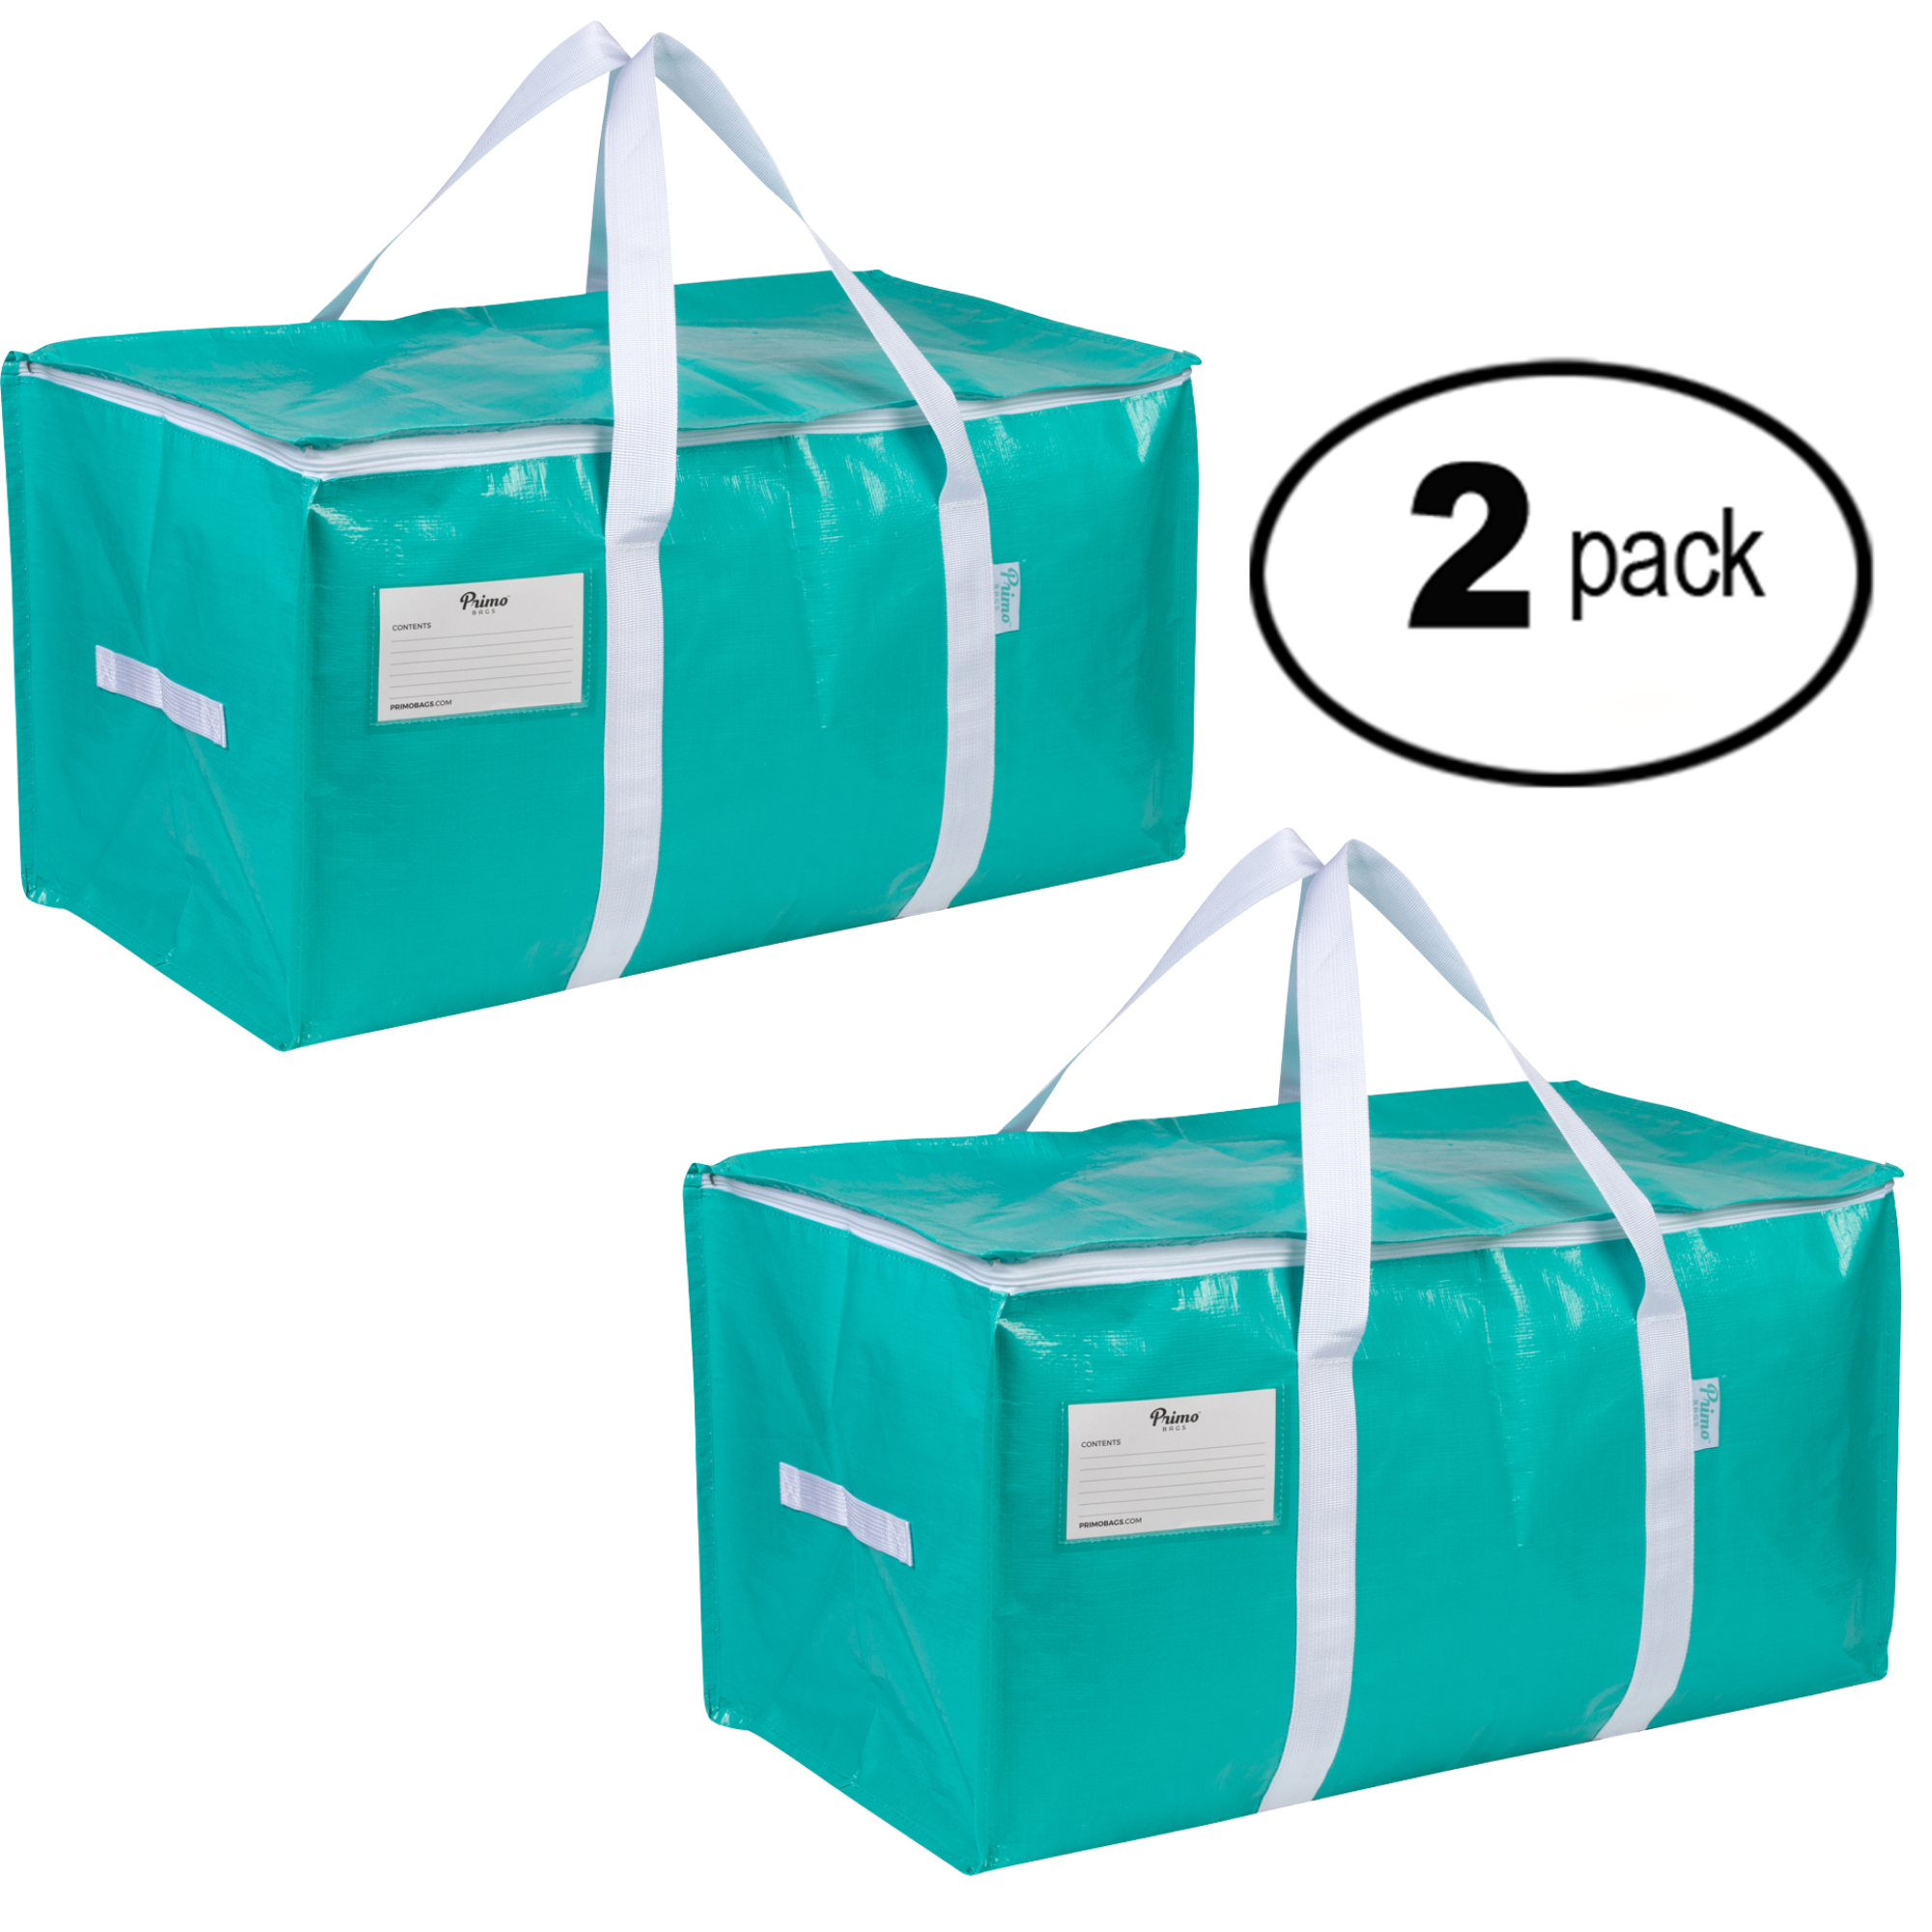 Primo Bags Heavy Duty Moving Packing and Storage Bags Storage Totes - Reusable Alternative to Moving Boxes with Strong Handles & Zippers Fold Flat 27 X 14 x 14 inches 2 Pack - image 1 of 8